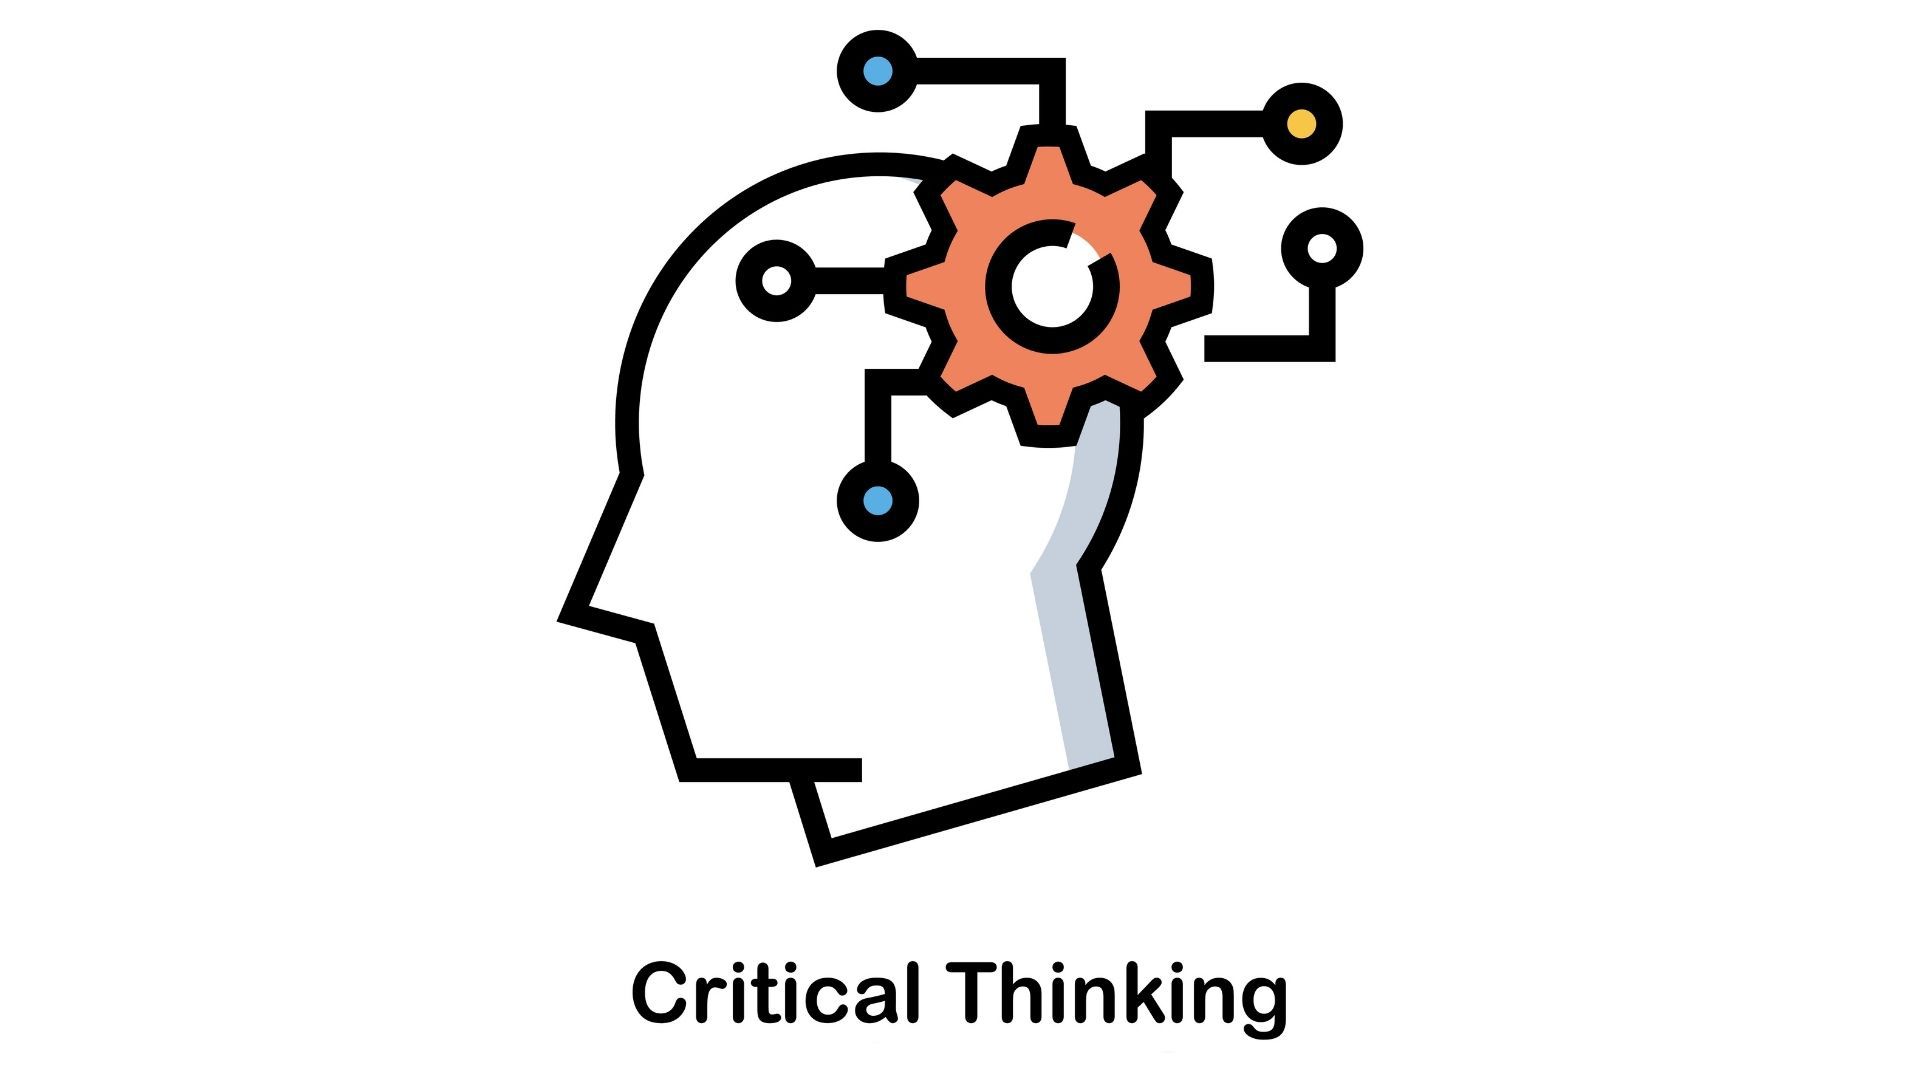 Critical Thinking Definition, Skills and Ways to Improve Marketing91